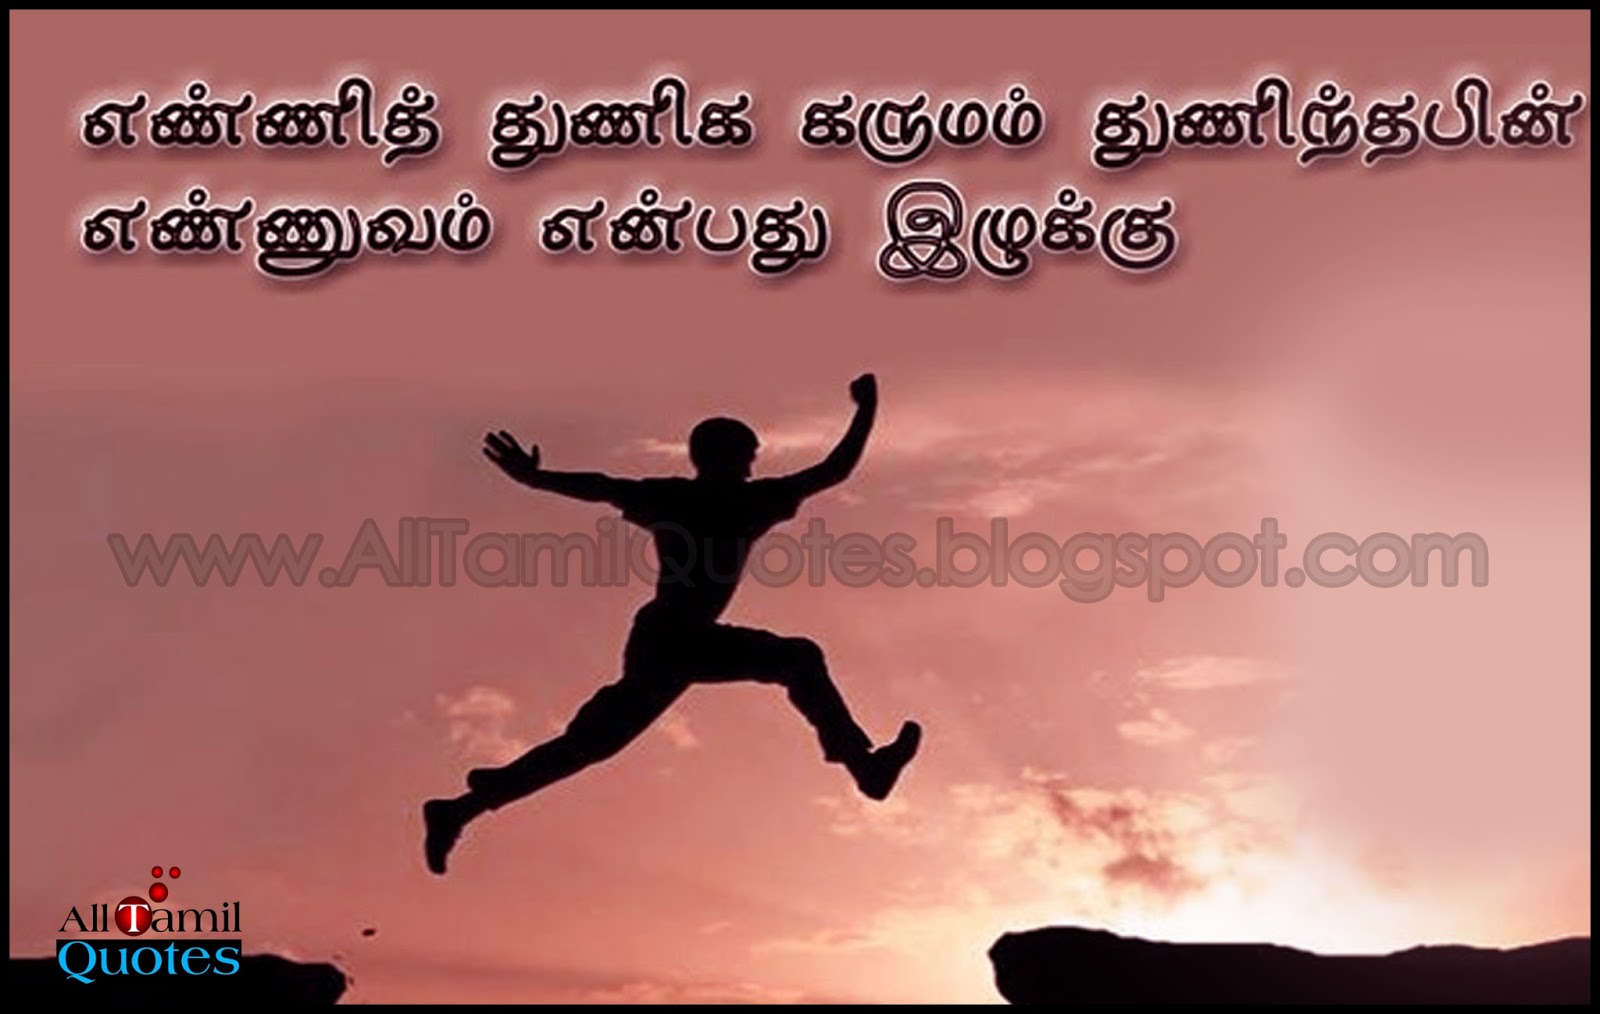 Tamil Good Motivational Thoughts and Quotes with Pictures 15